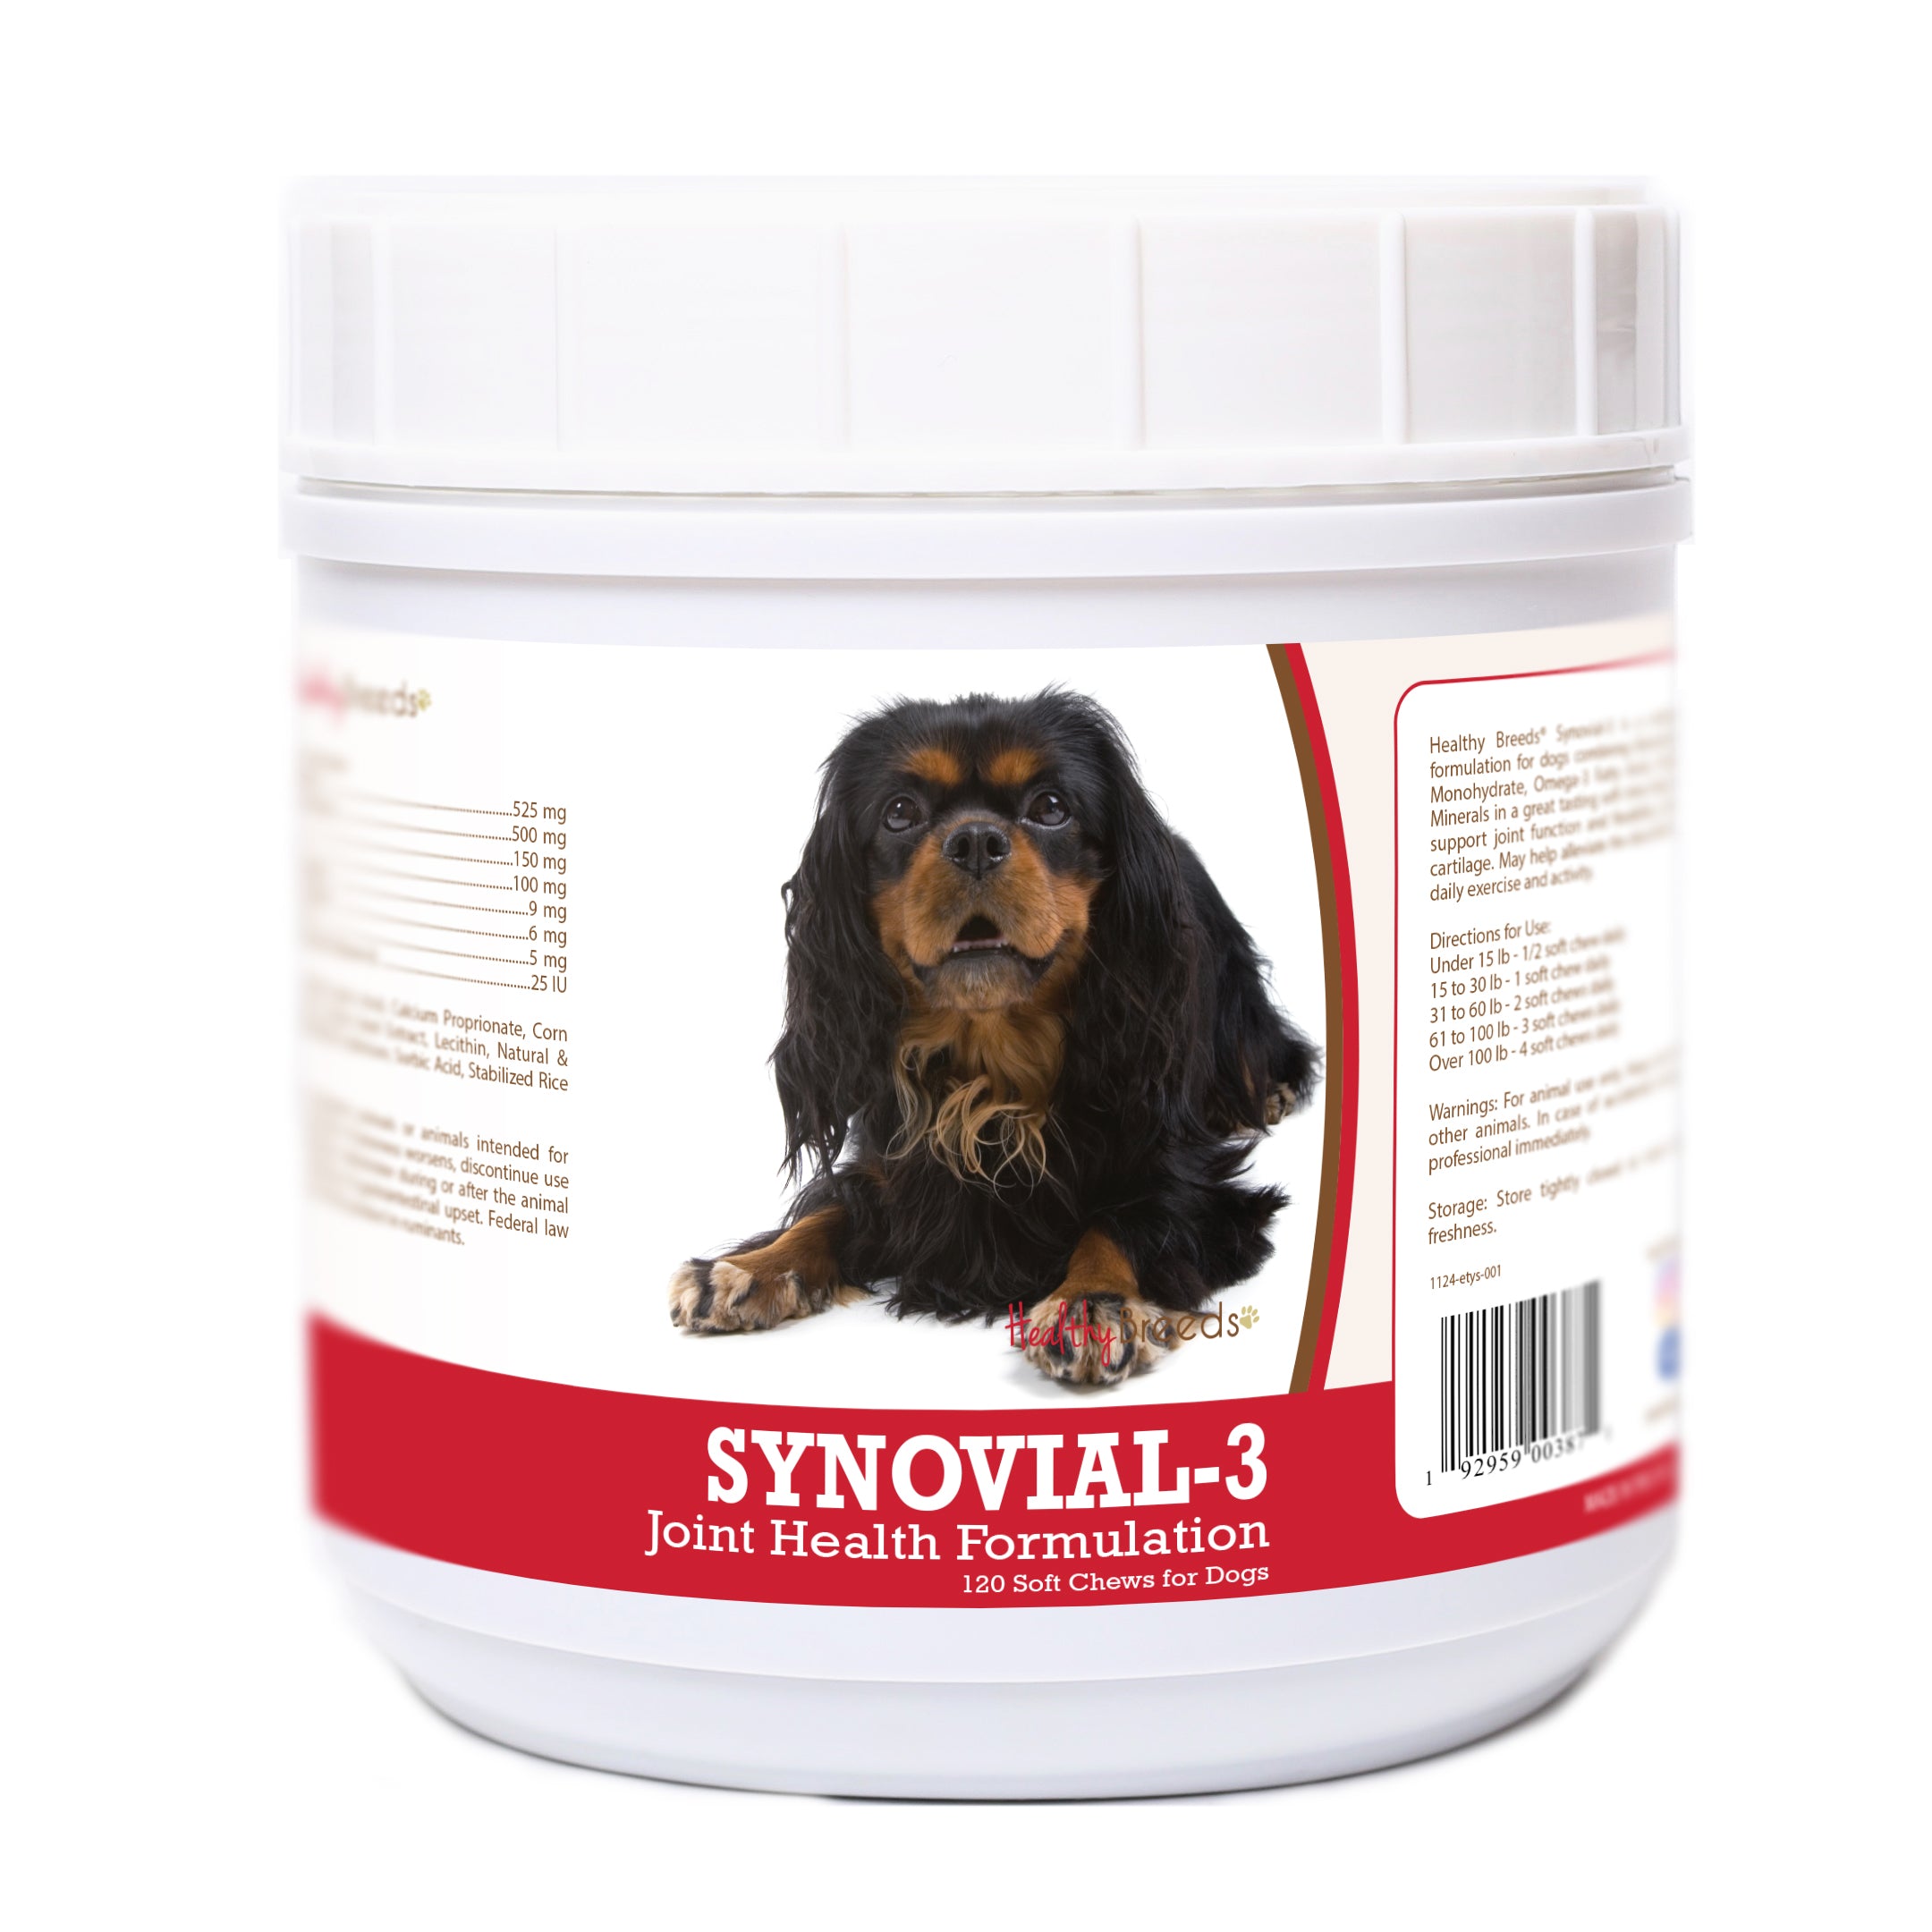 English Toy Spaniel Synovial-3 Joint Health Formulation Soft Chews 120 Count